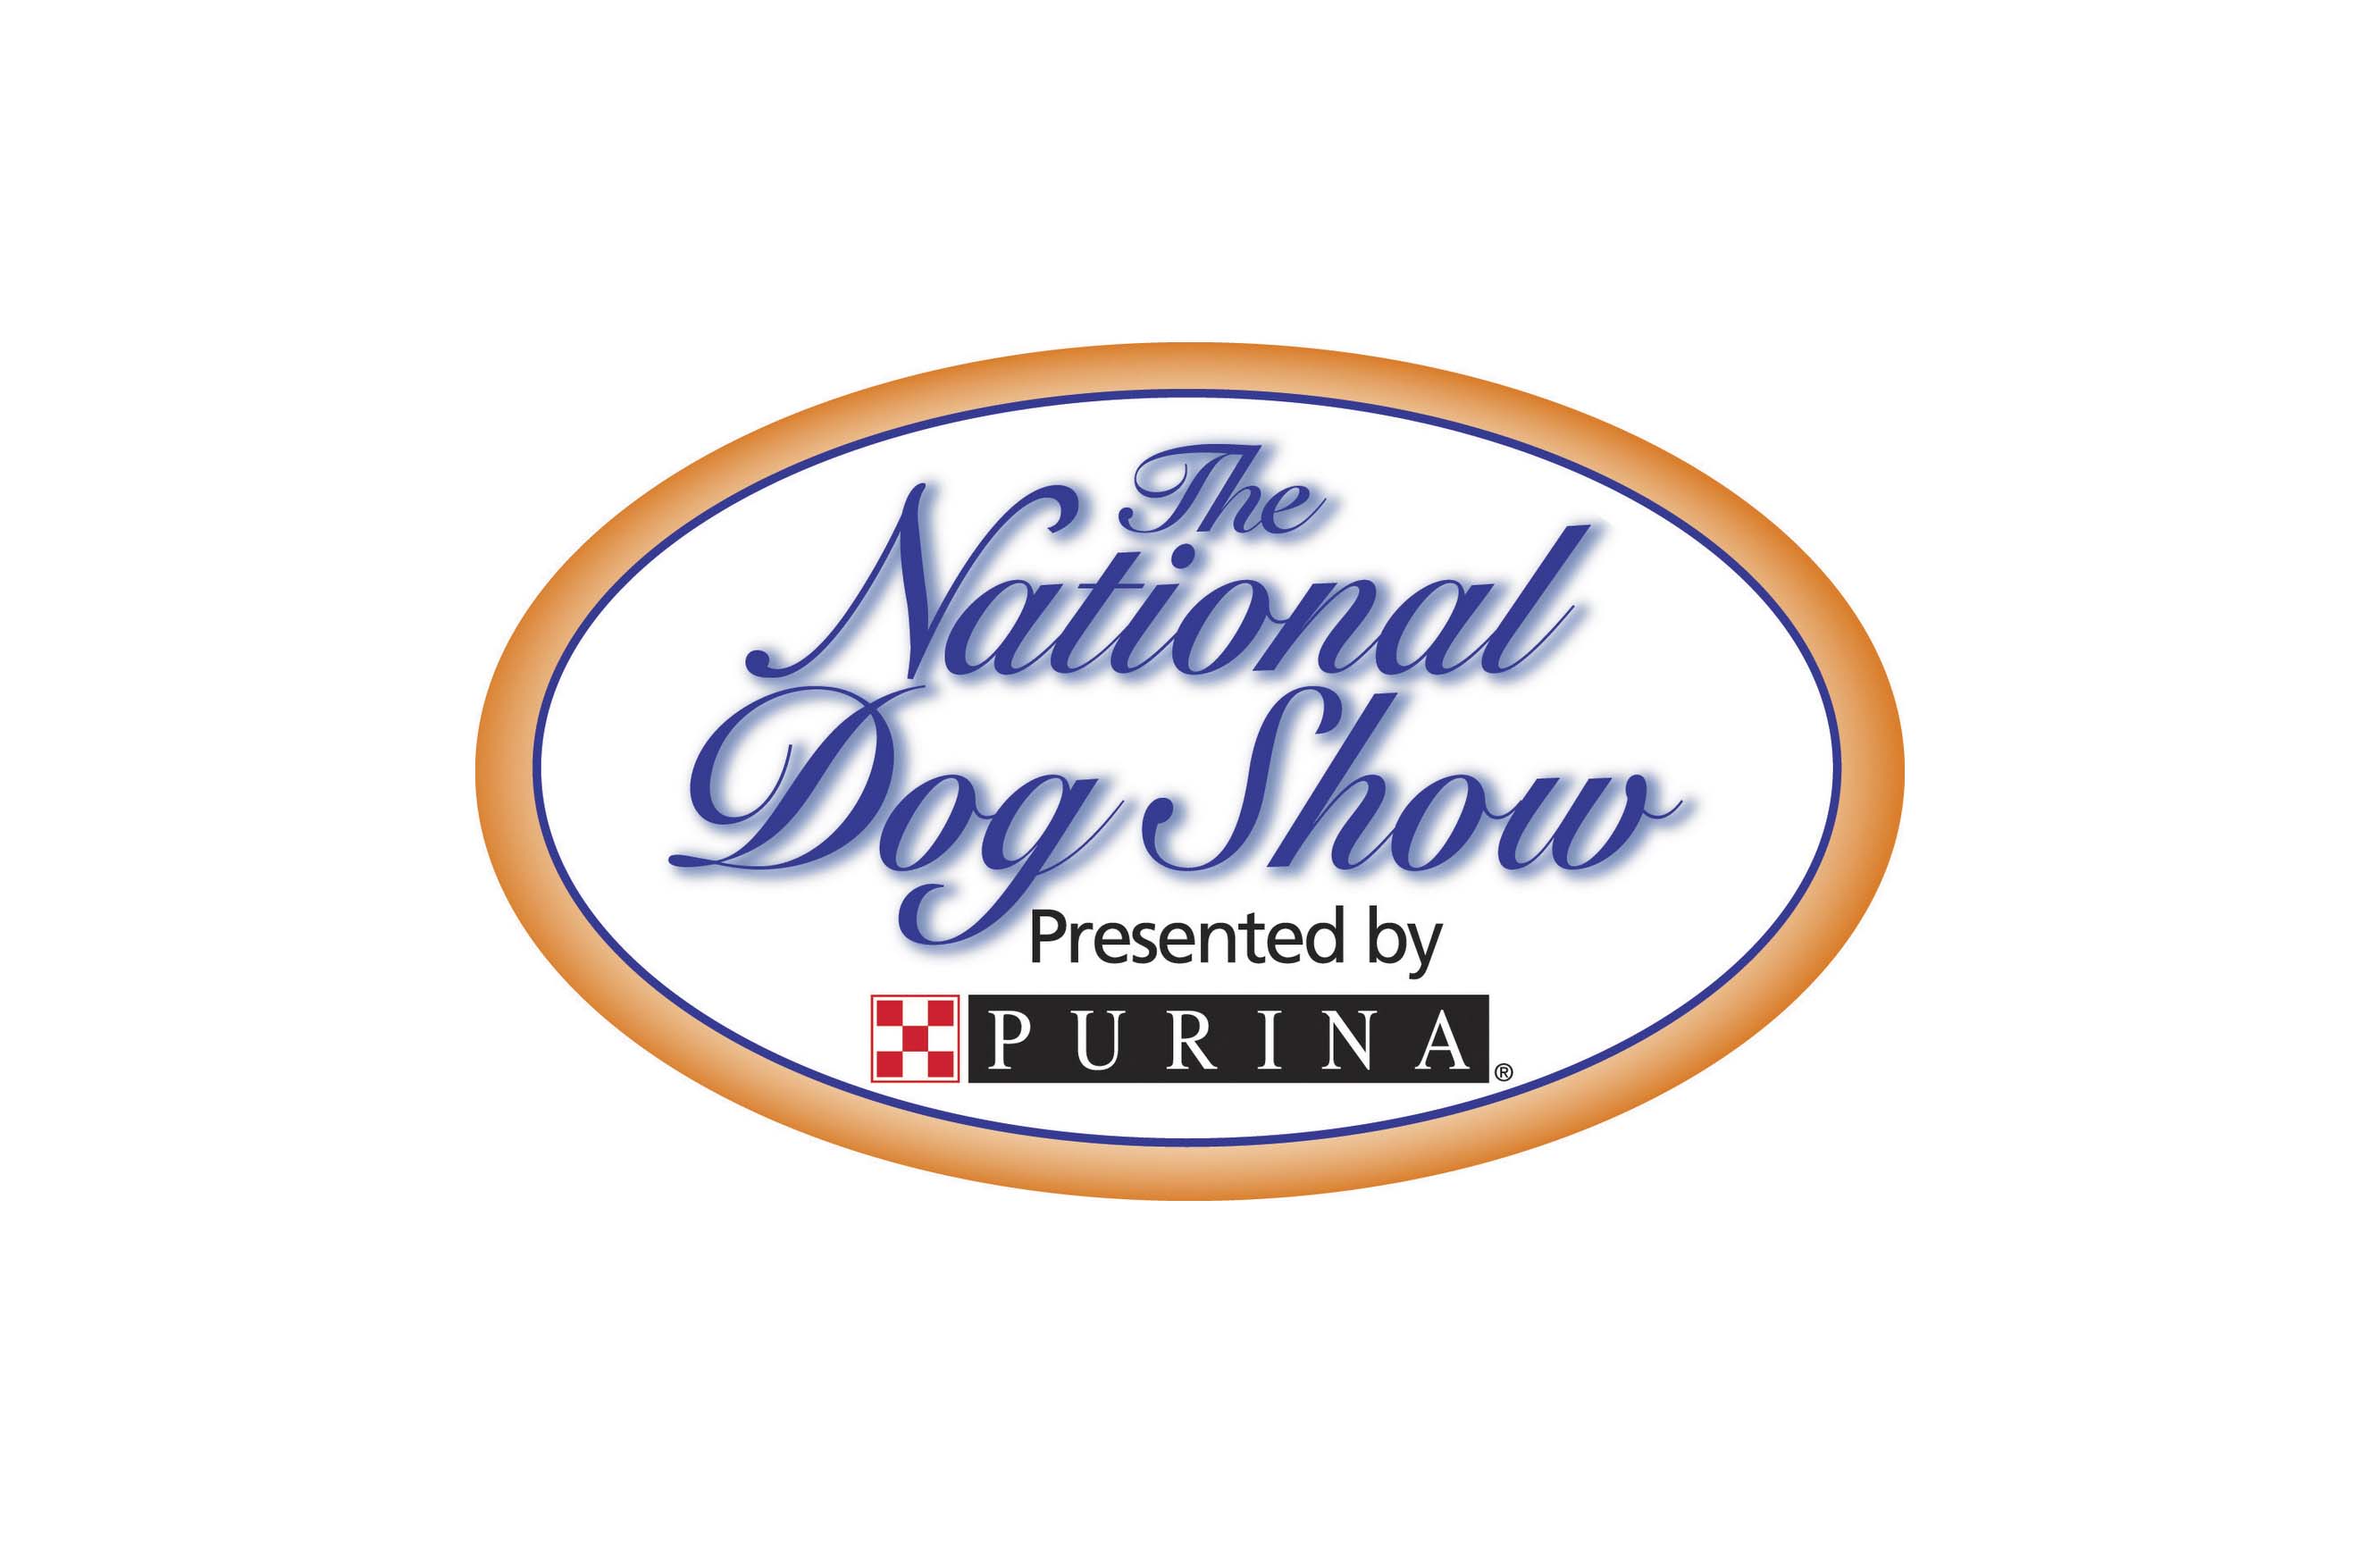 With over 20 million annual viewers, the National Dog Show Presented by Purina will premiere on Thanksgiving Day on NBC at noon in all time zones. Tune in to see who will be crowned the 2017 champion